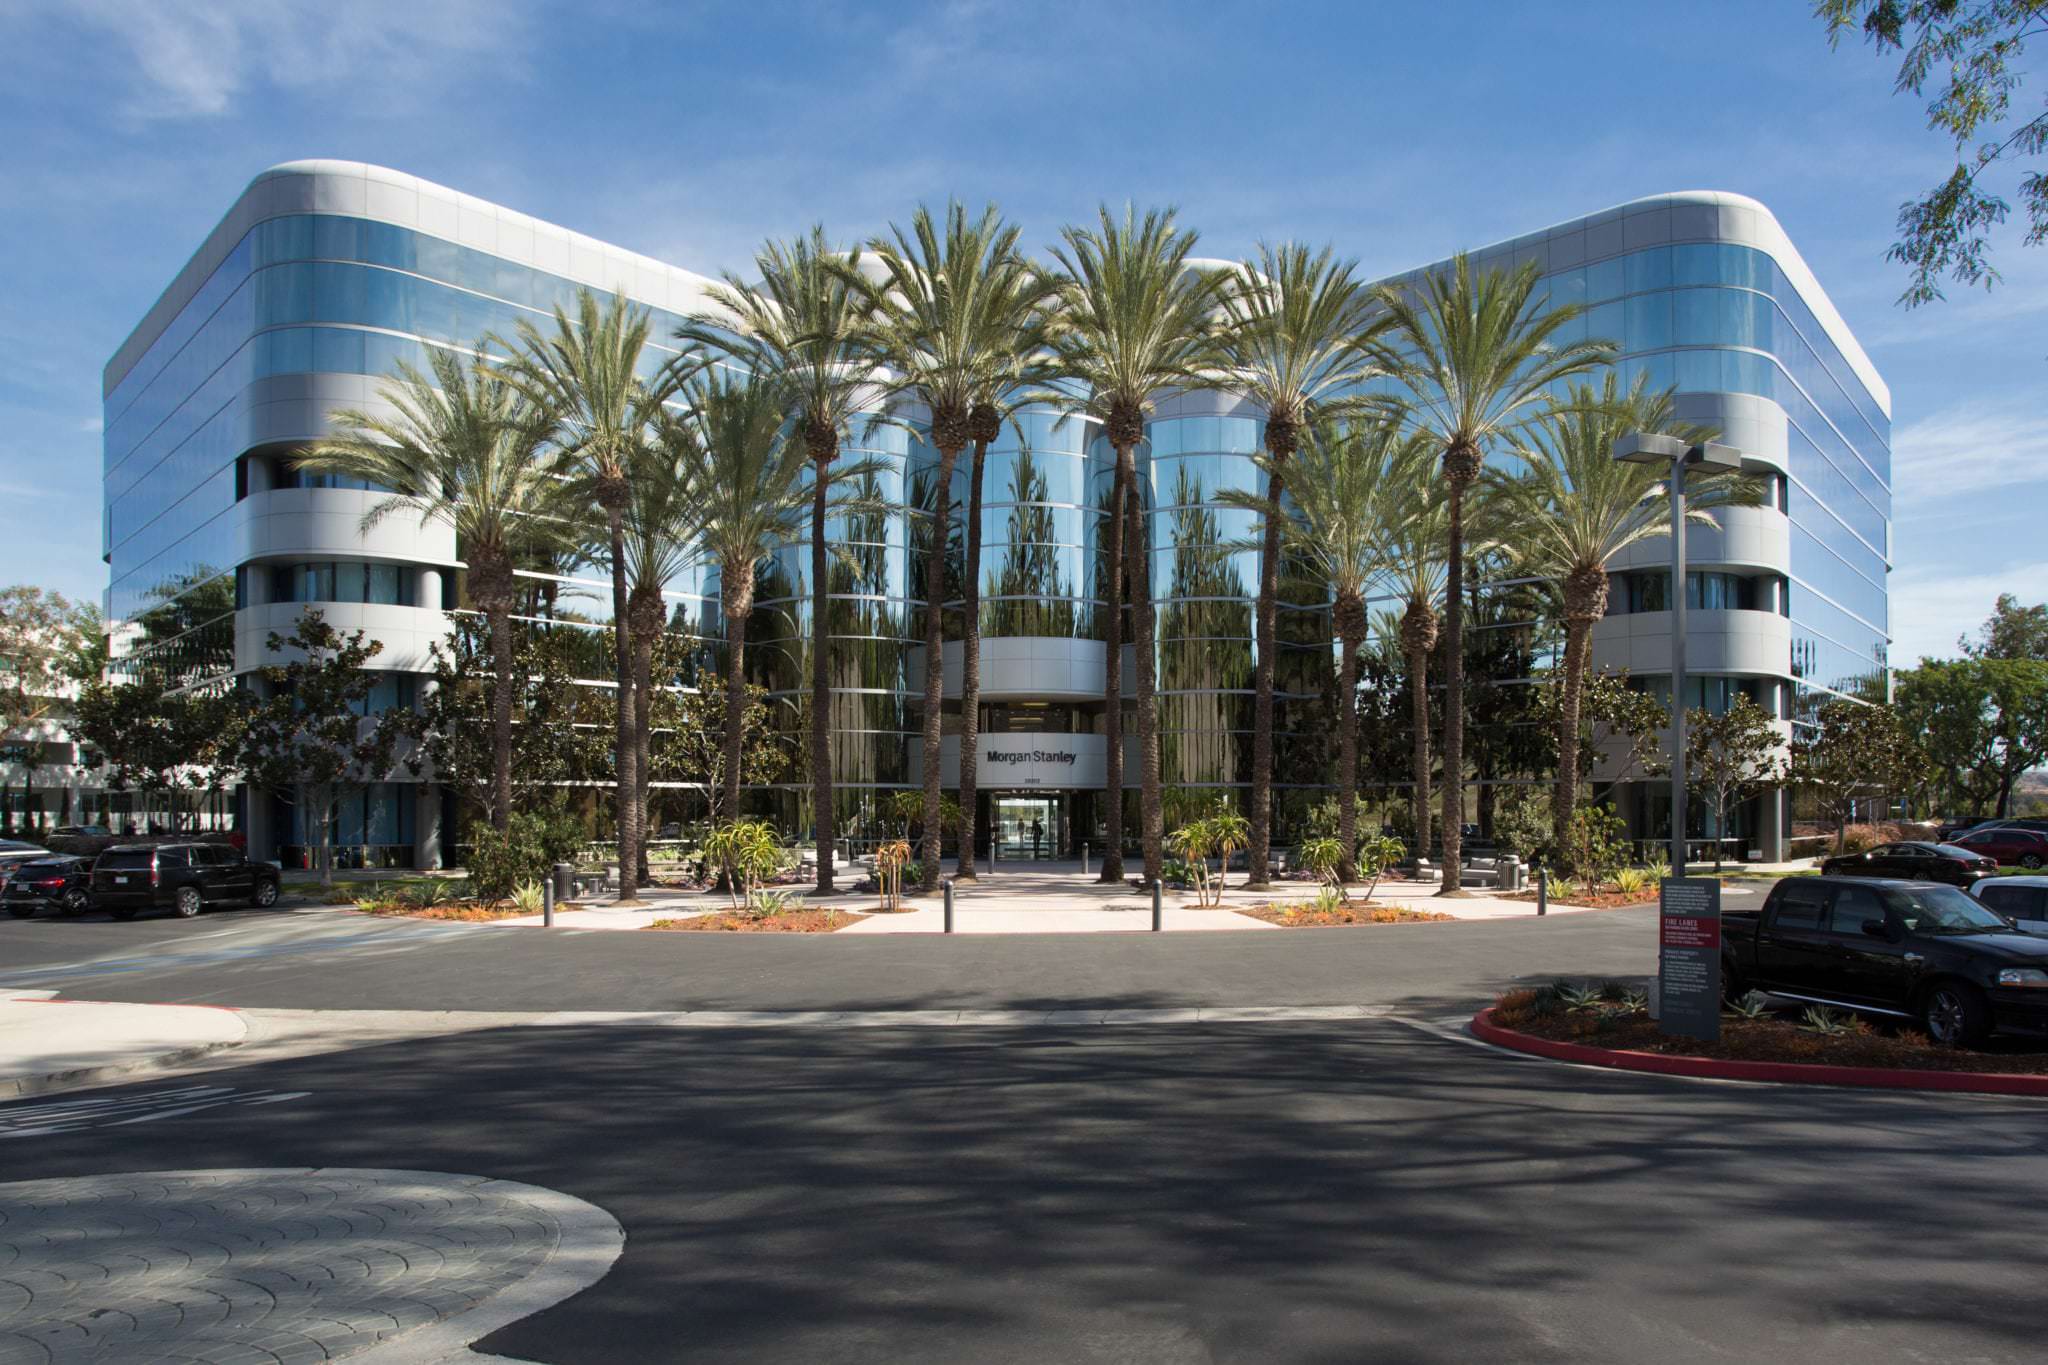 Exterior of the Crown Carrot Financial Center in Laguna Niguel